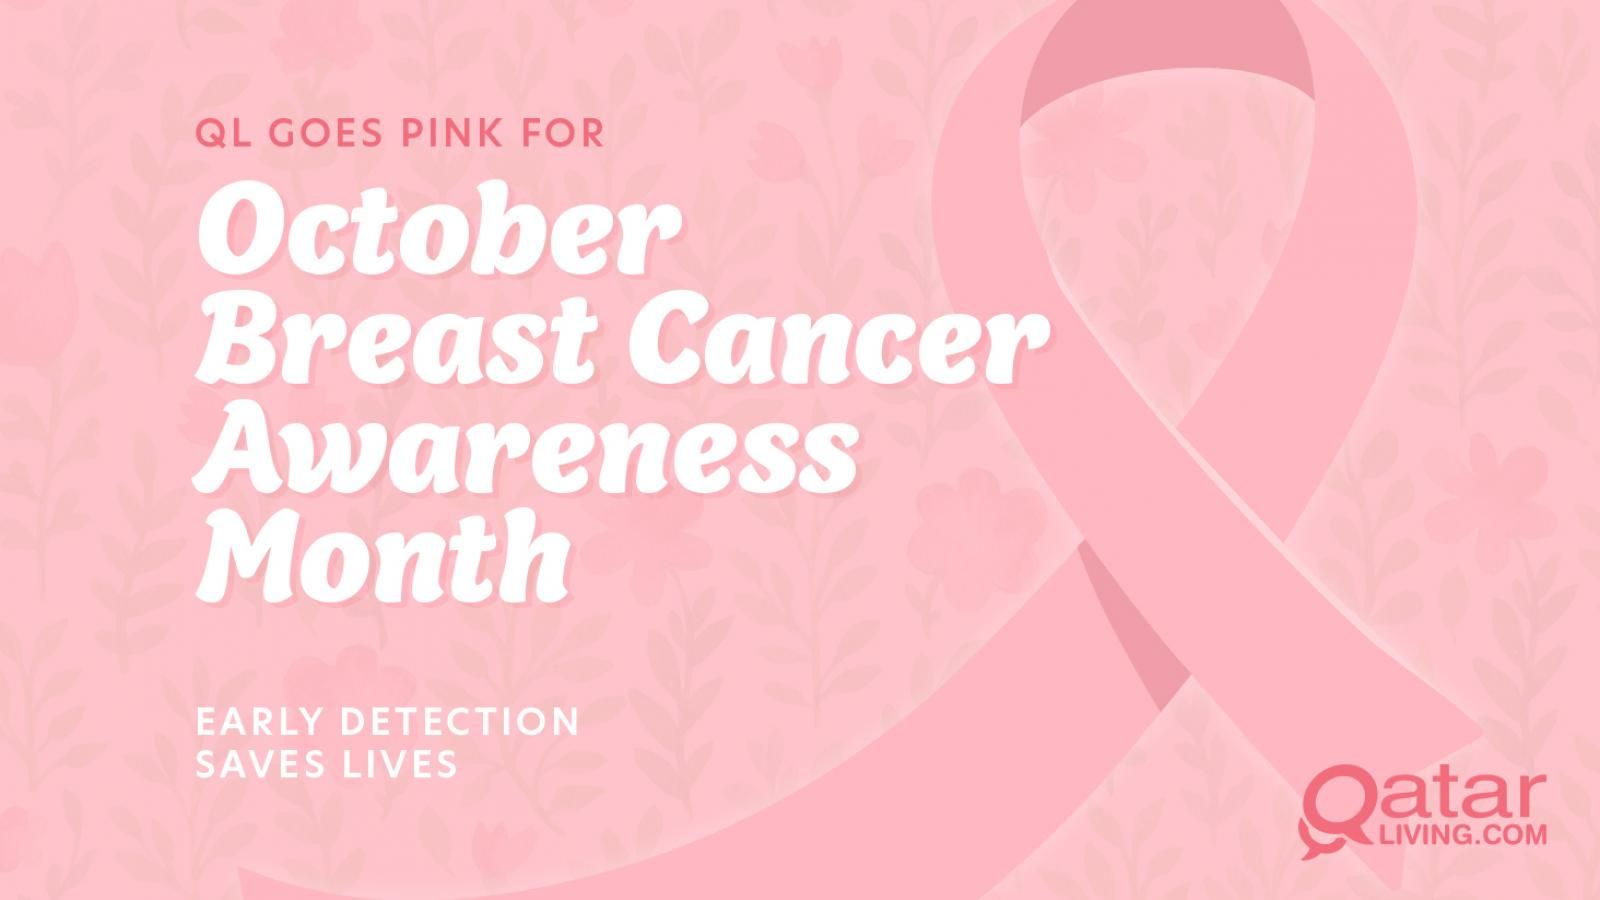 A Guide to Breast Cancer Awareness Month in Qatar